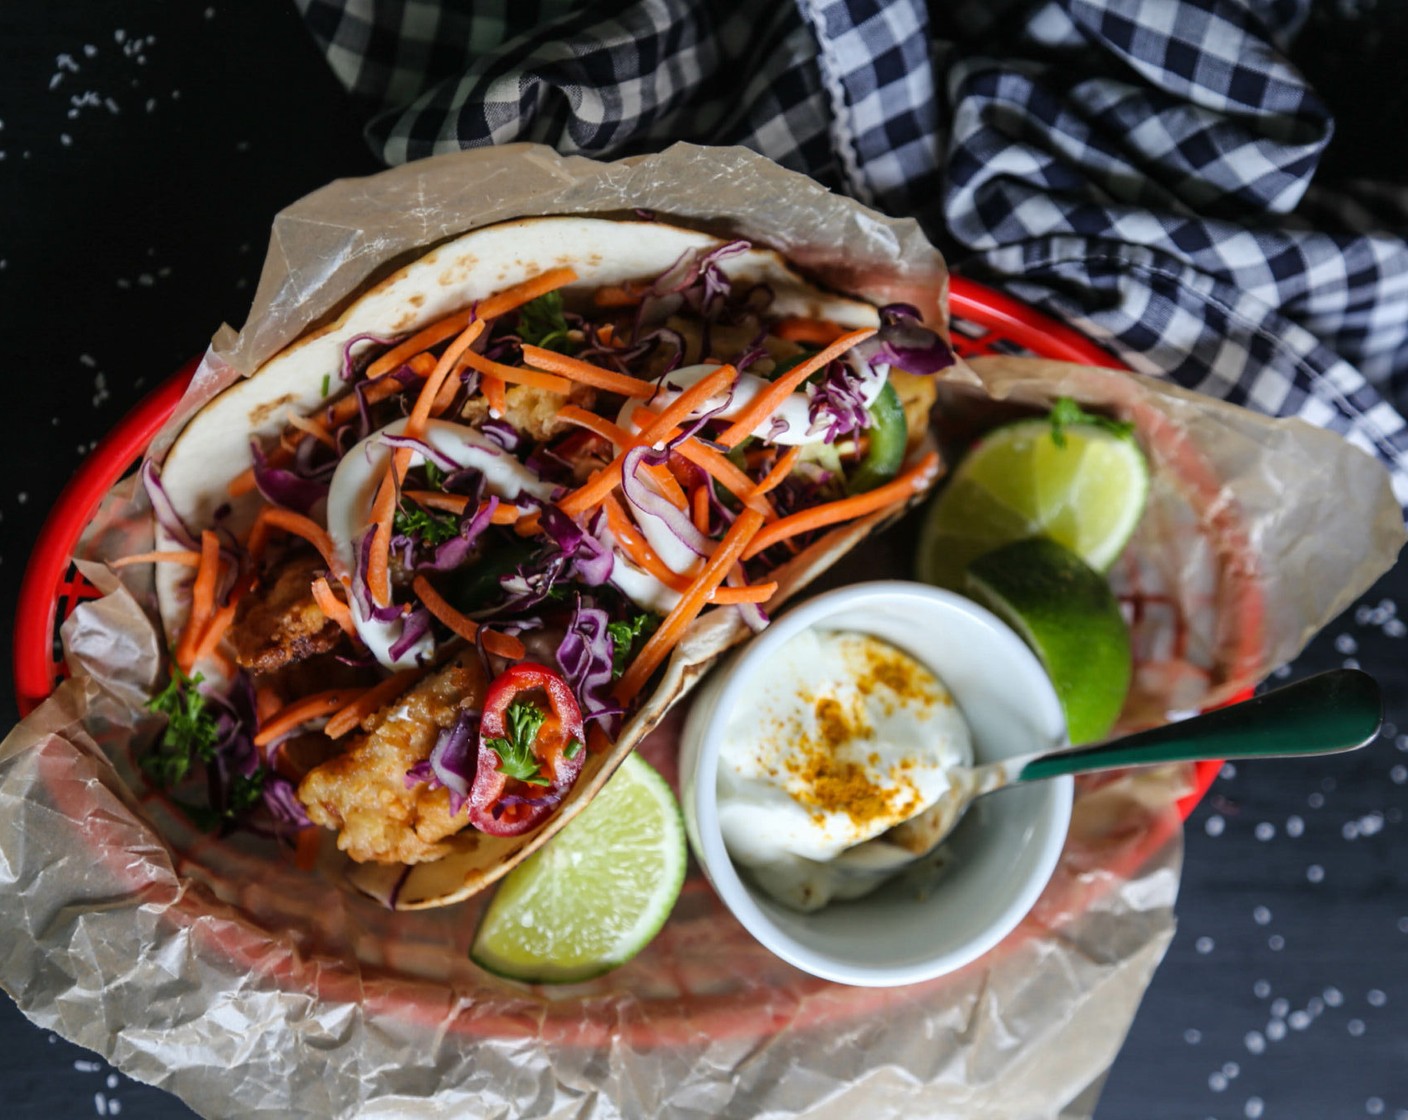 step 4 To serve, place a few chicken strips into a Flour Tortillas (to taste), add Red Cabbage (to taste), Jalapeño Pepper Slices (to taste), Serrano Pepper Rings (to taste), shredded Carrots (to taste) and put a dollop of ginger aioli on top. Serve and enjoy!